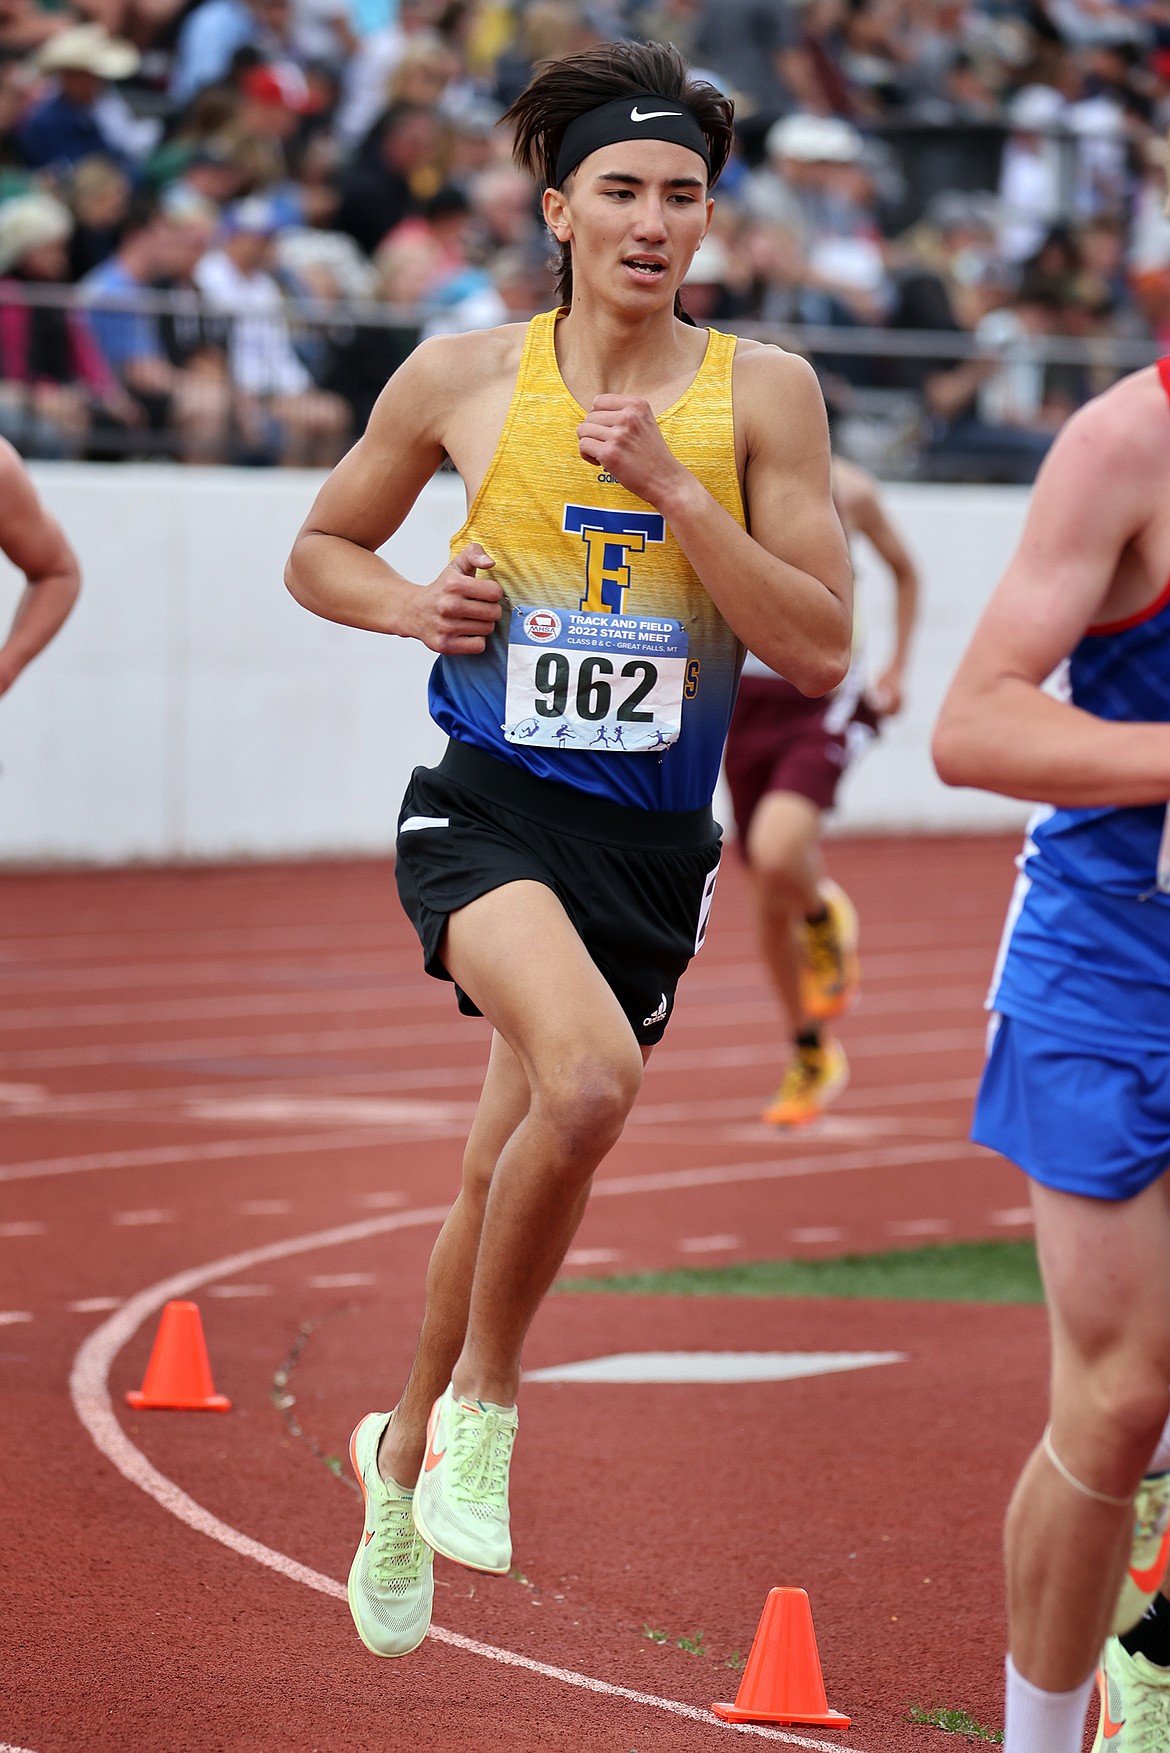 William Hyatt competes at the State B-C track and field meet in Great Falls last weekend. (Jeremy Weber/For the MIVP)